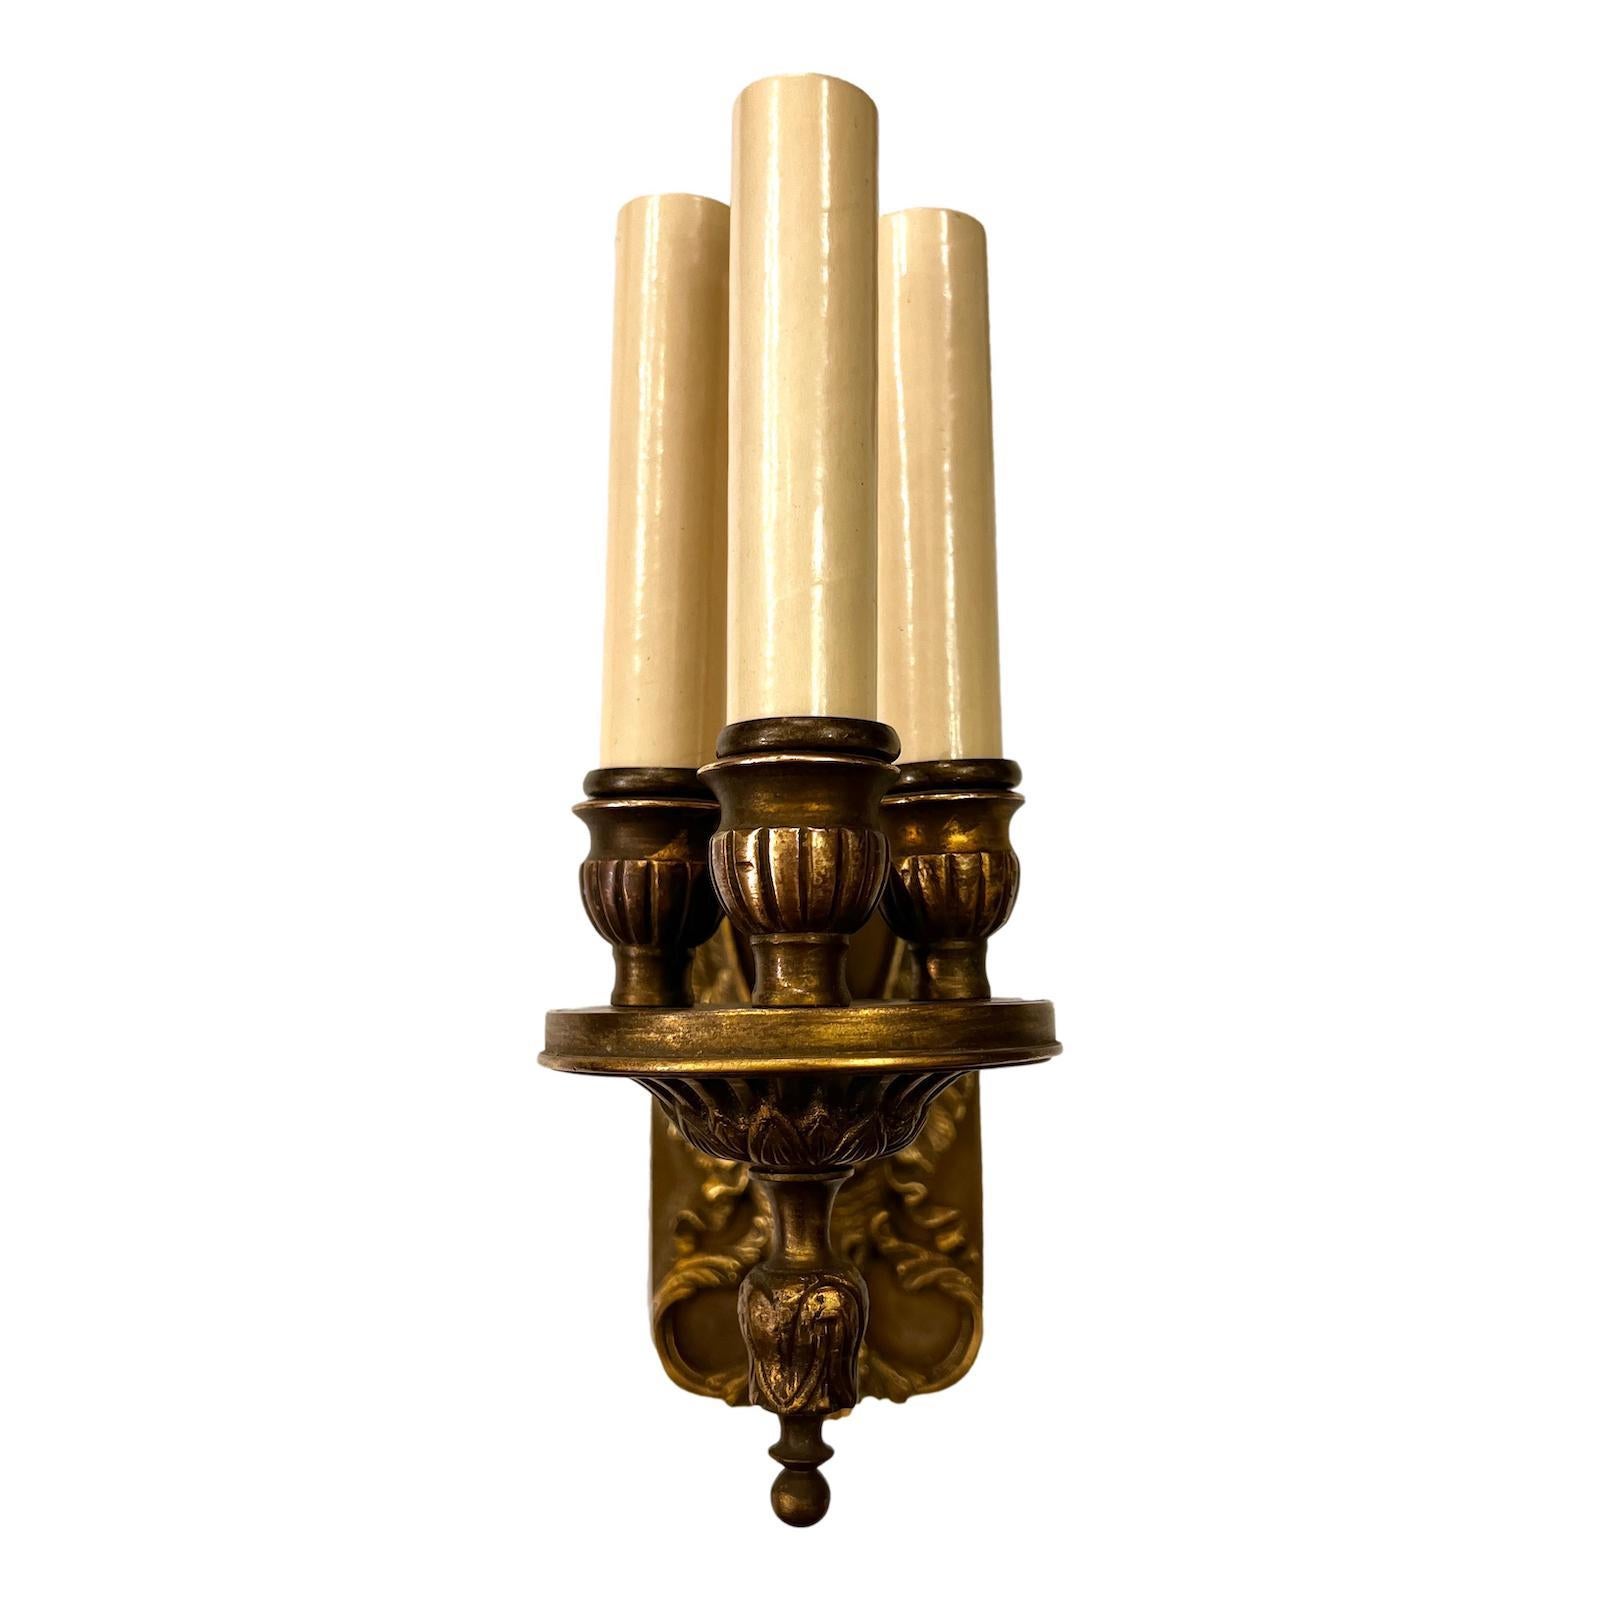 A pair of circa 1920s French Empire style three-light sconces with original patina.

Measurements:
Height: 9